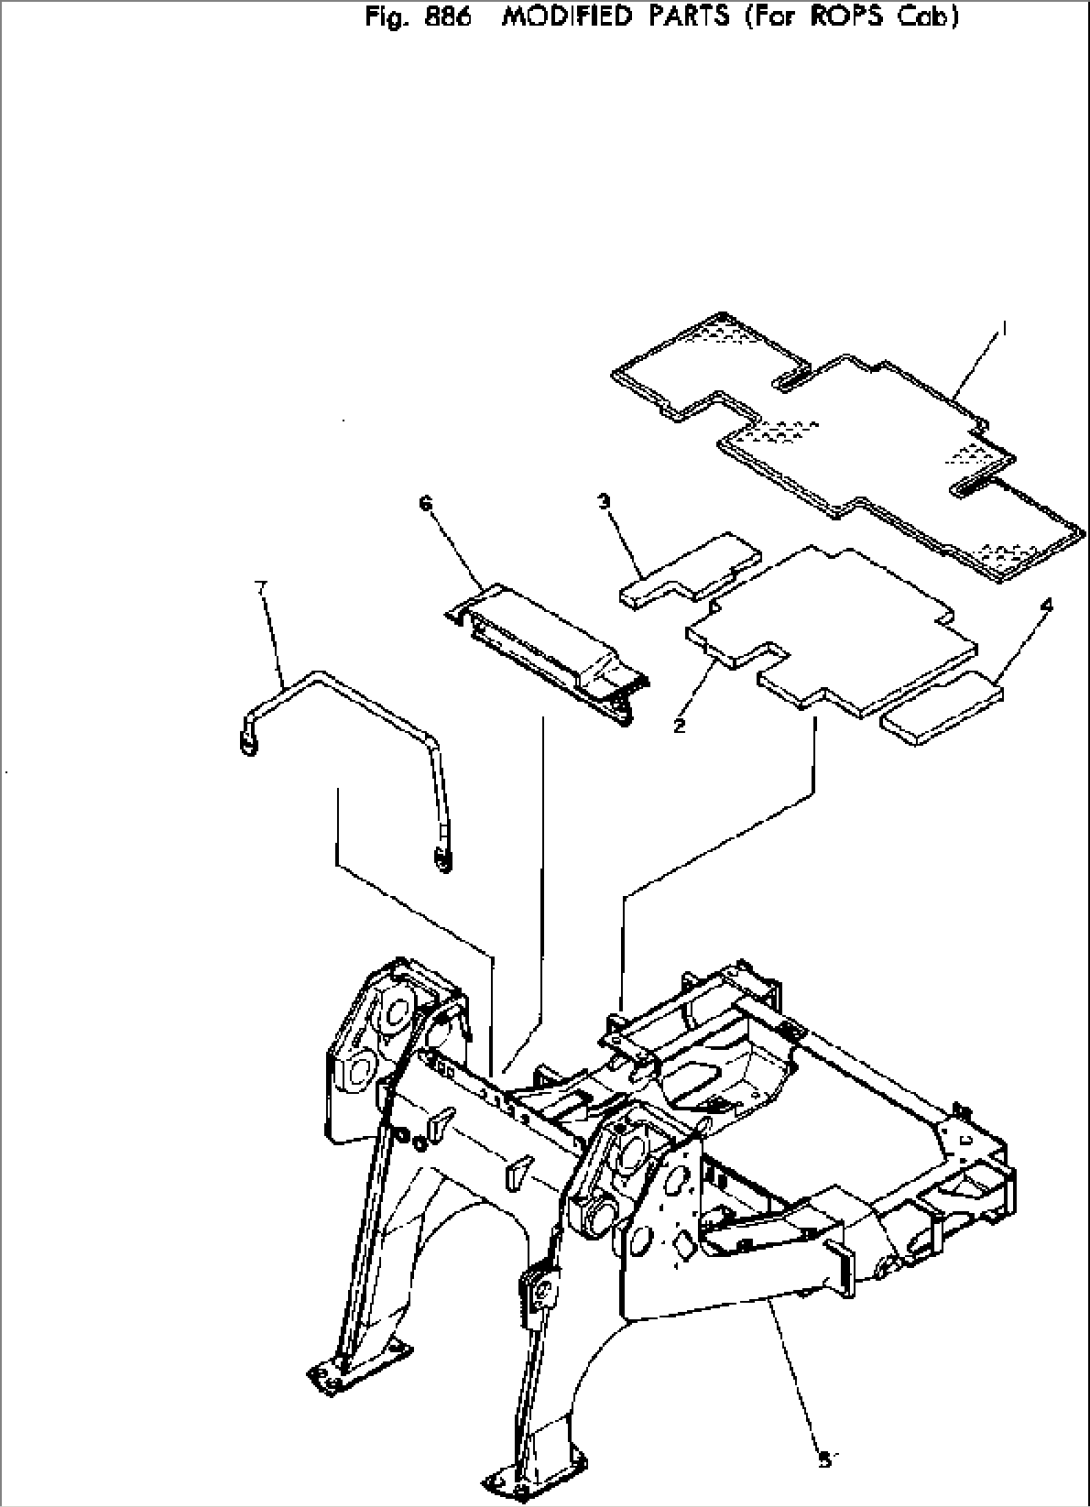 MODIFIED PARTS (FOR ROPS CAB)